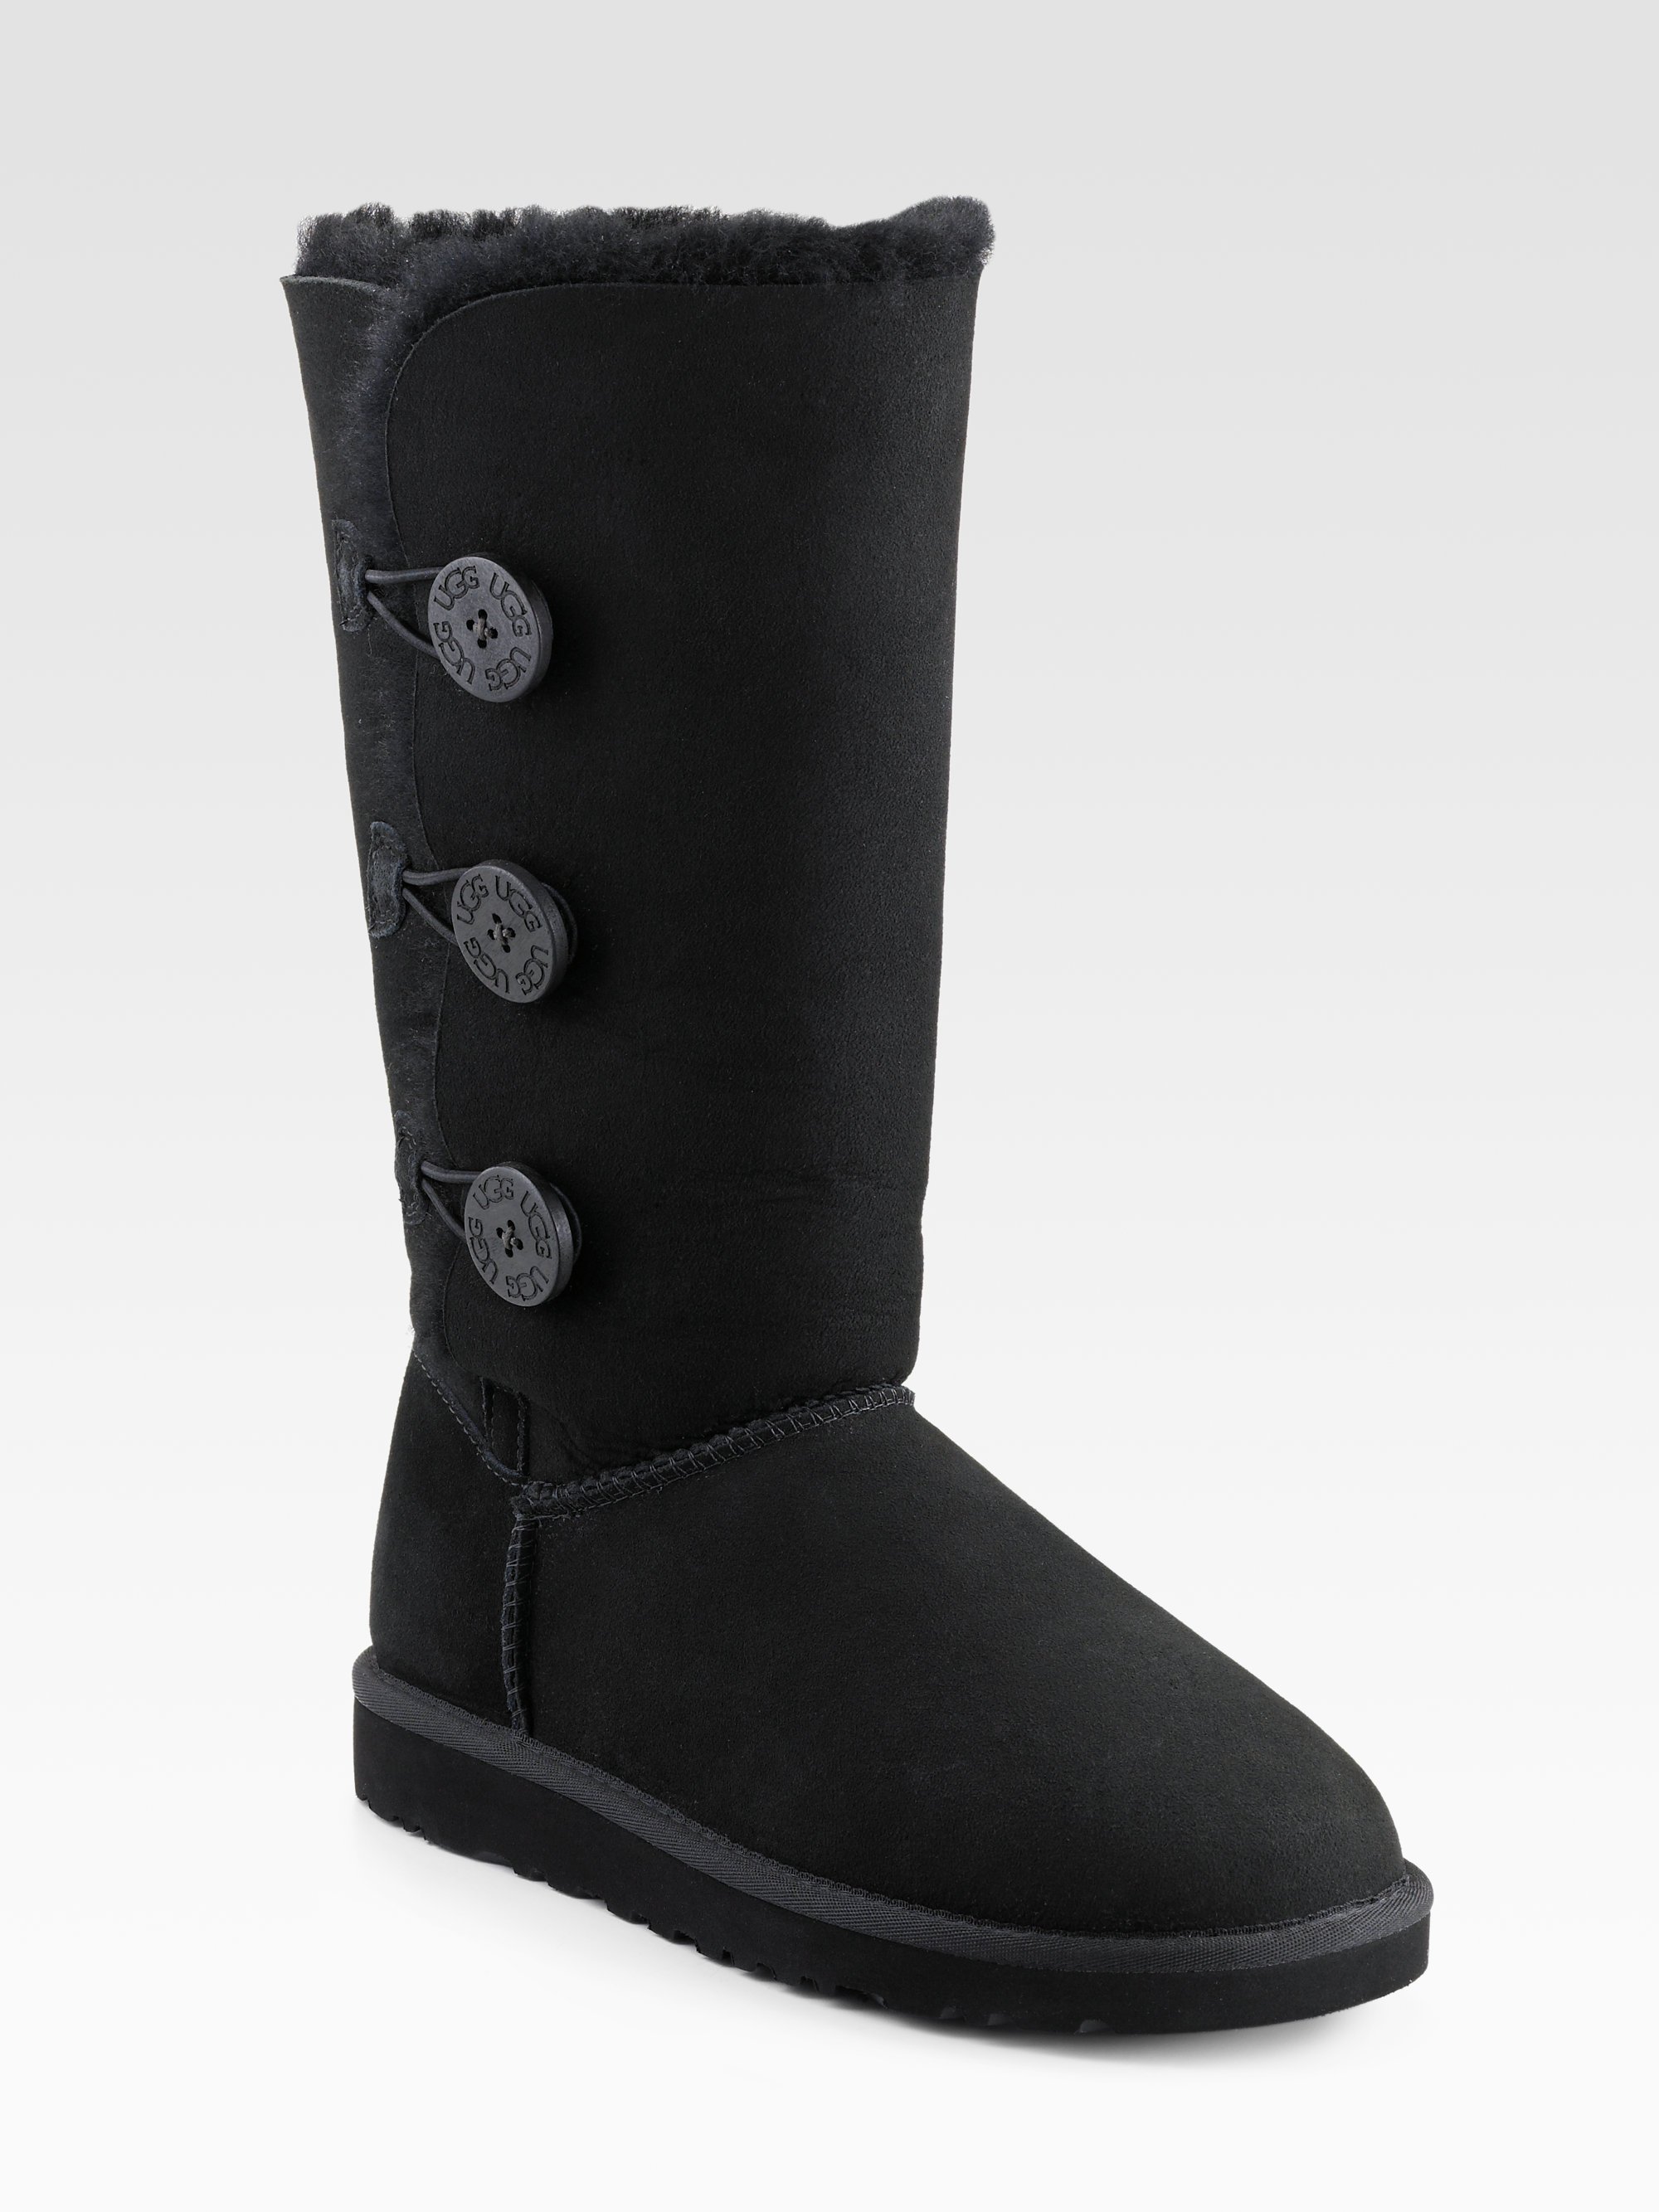 Ugg Tall Bailey Button Triplet Suede & Sheepskin Boots in Black | Lyst